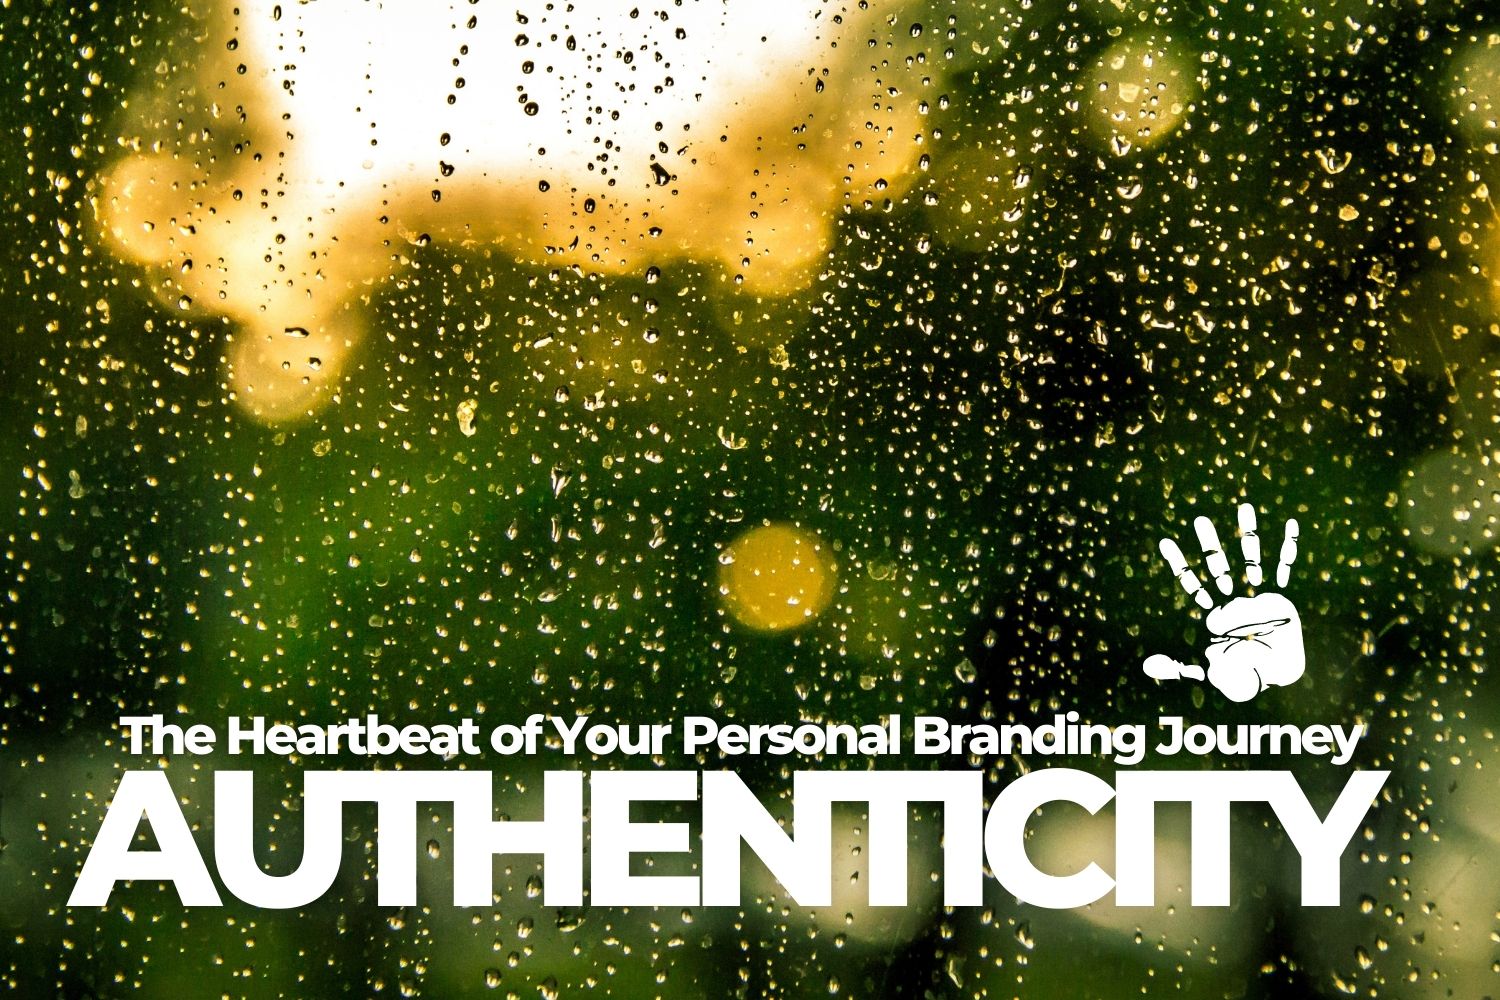 Authenticity: The Heartbeat of Your Personal Branding Journey